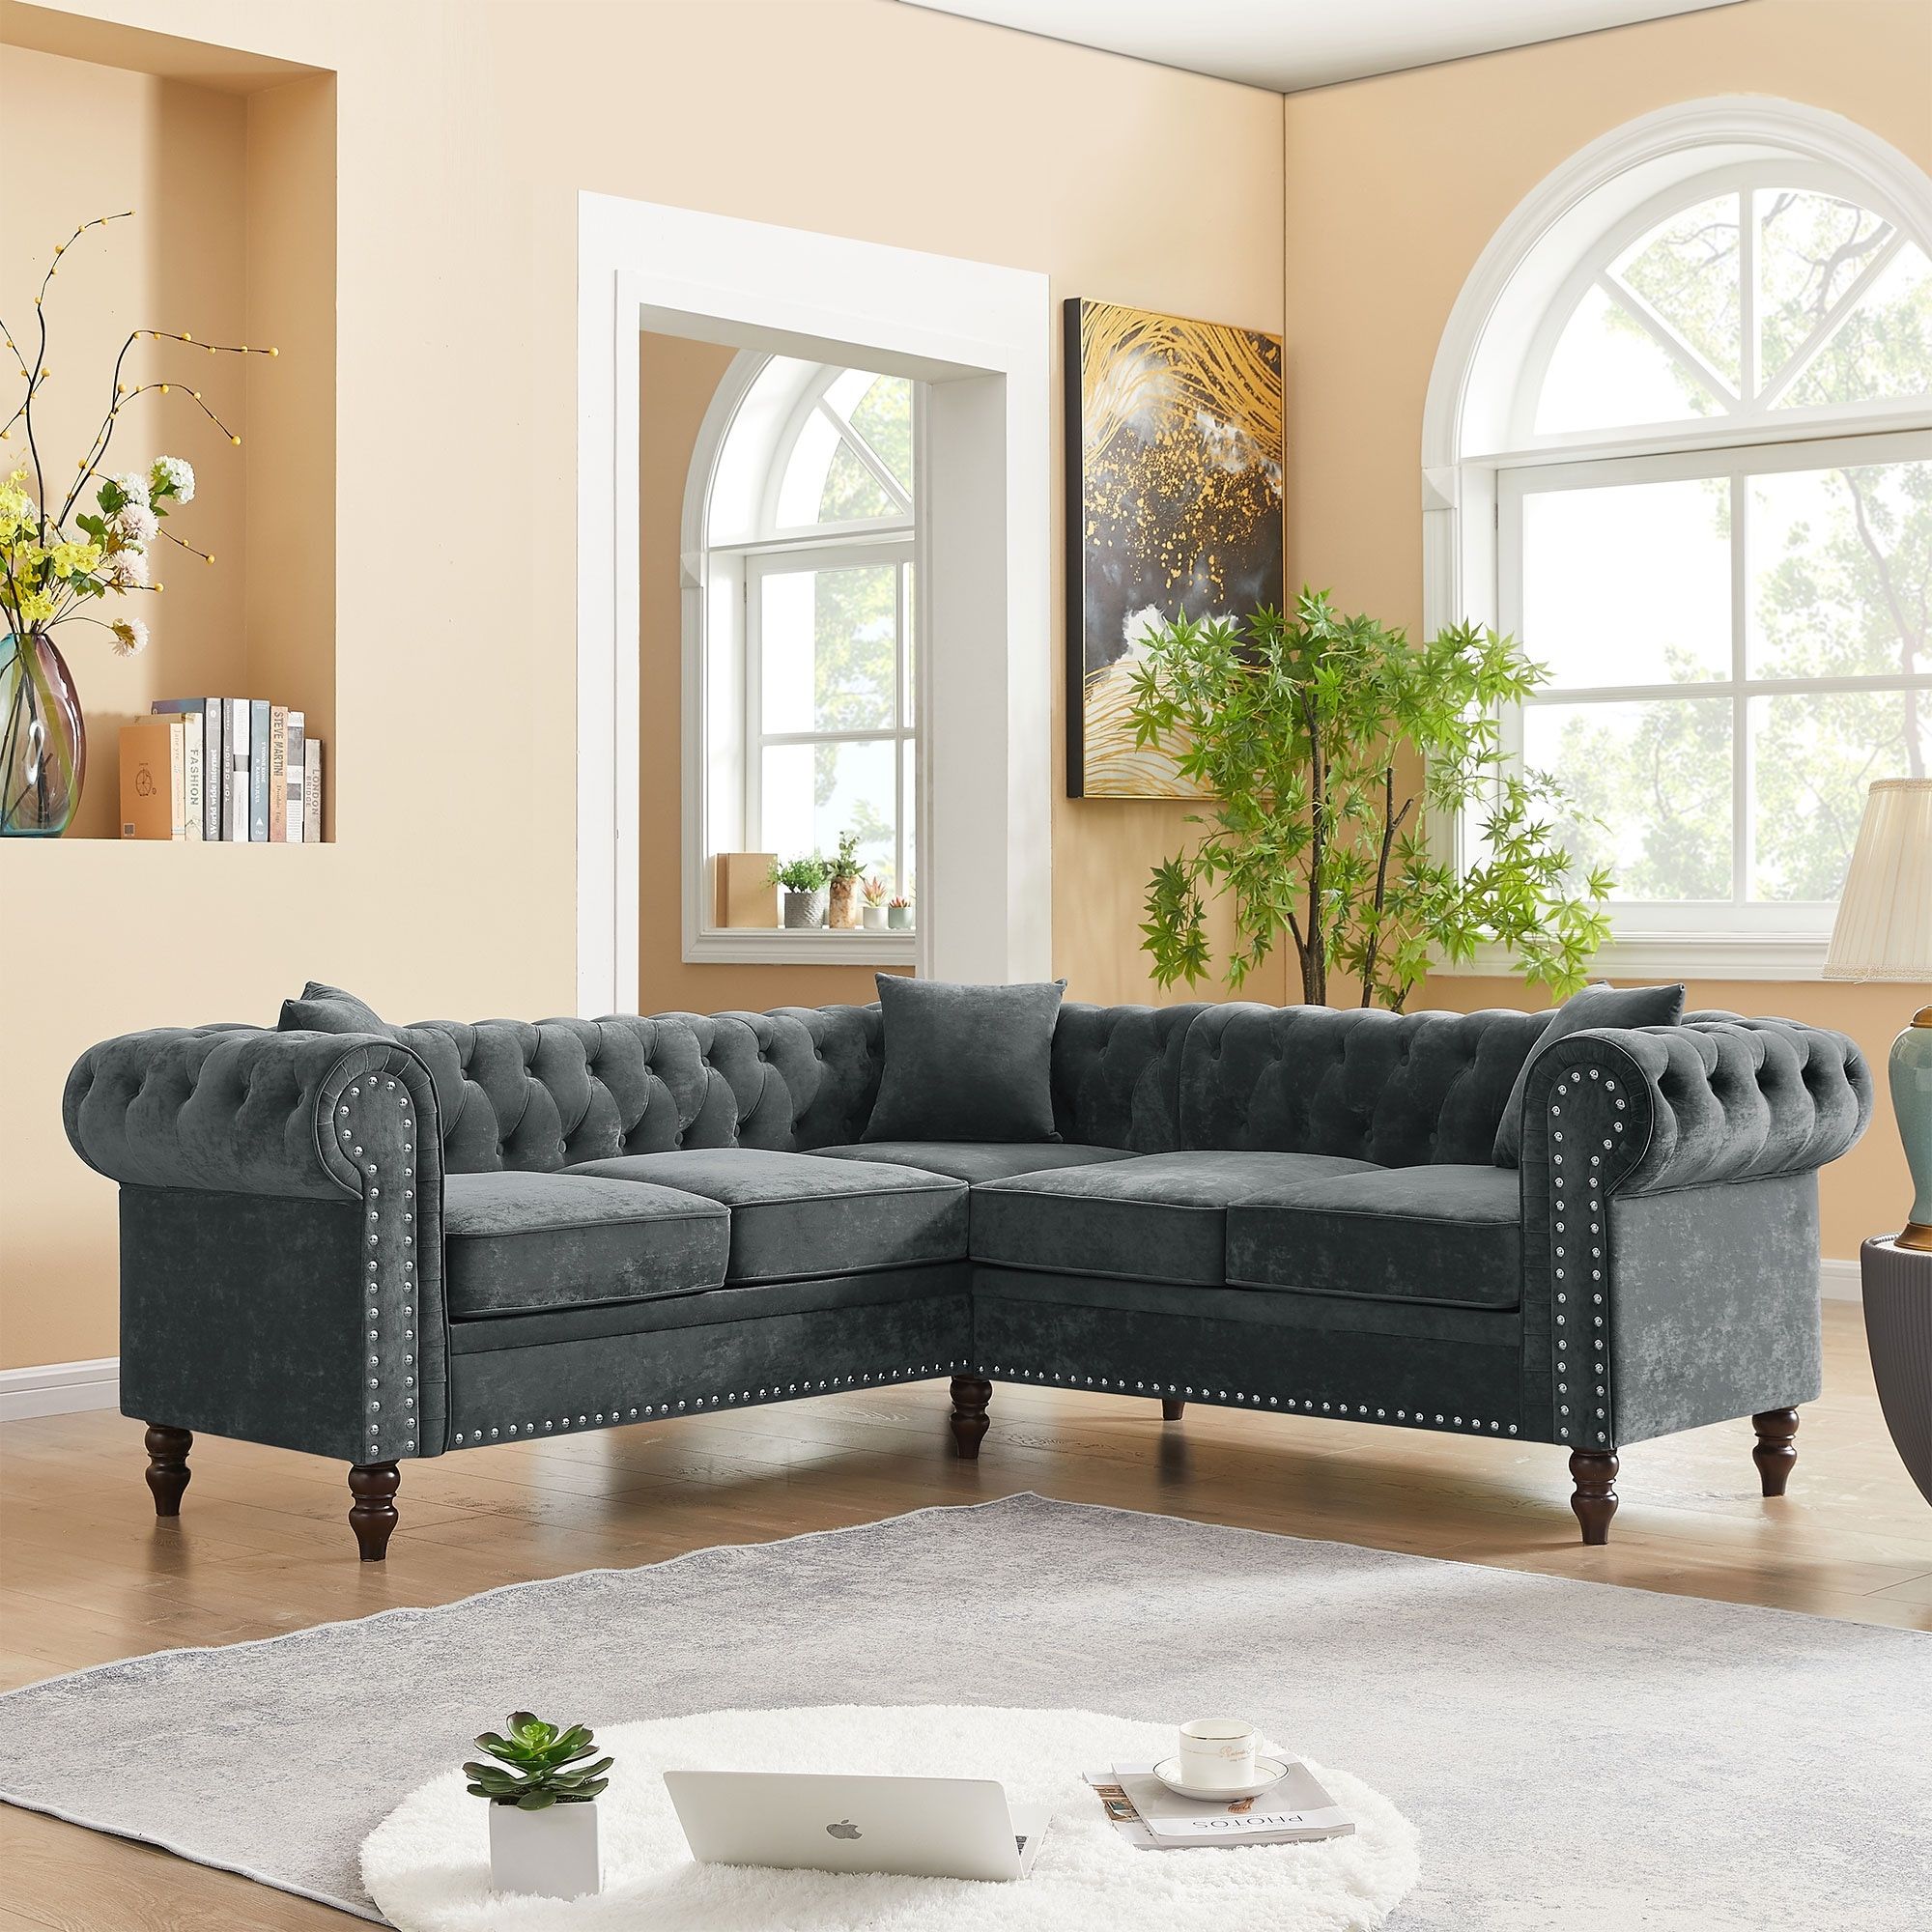 Sofa,L Shaped Sofaa,Deep Button Tufted Upholstered, Roll Arm Luxury Classic  Sofa, 3 Pillows Included – Bed Bath & Beyond – 38283618 Intended For Tufted Upholstered Sofas (Photo 7 of 15)